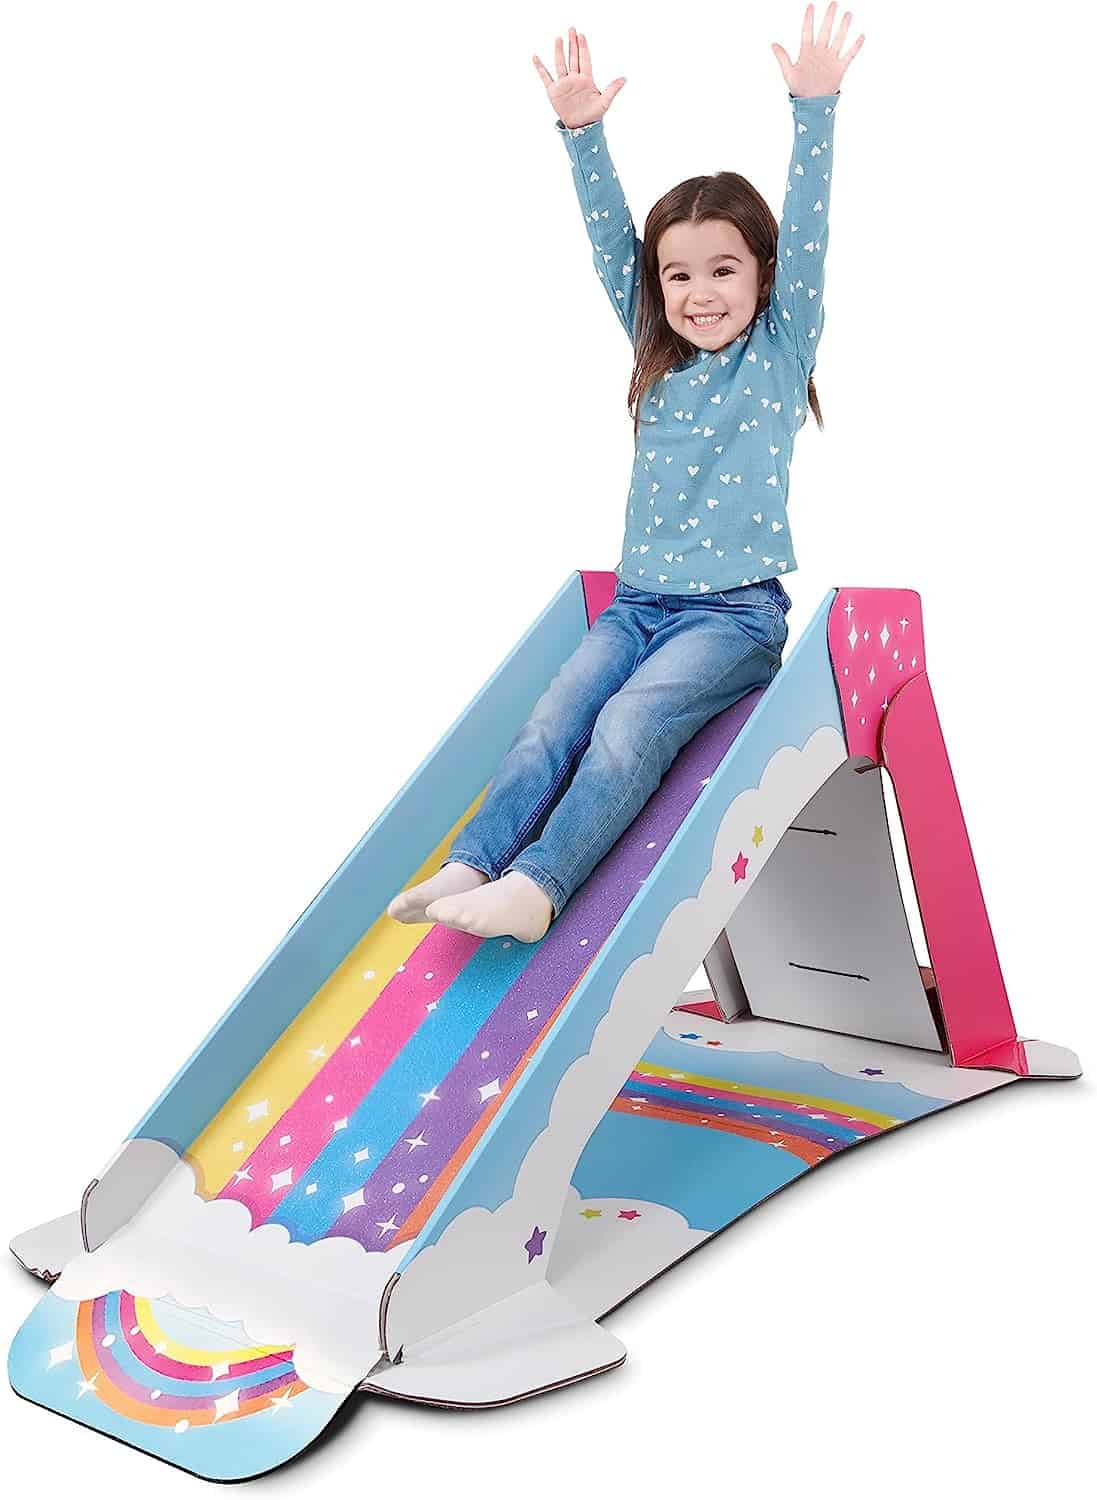 Pop2Play Kids Slide Indoor Playground for Toddlers